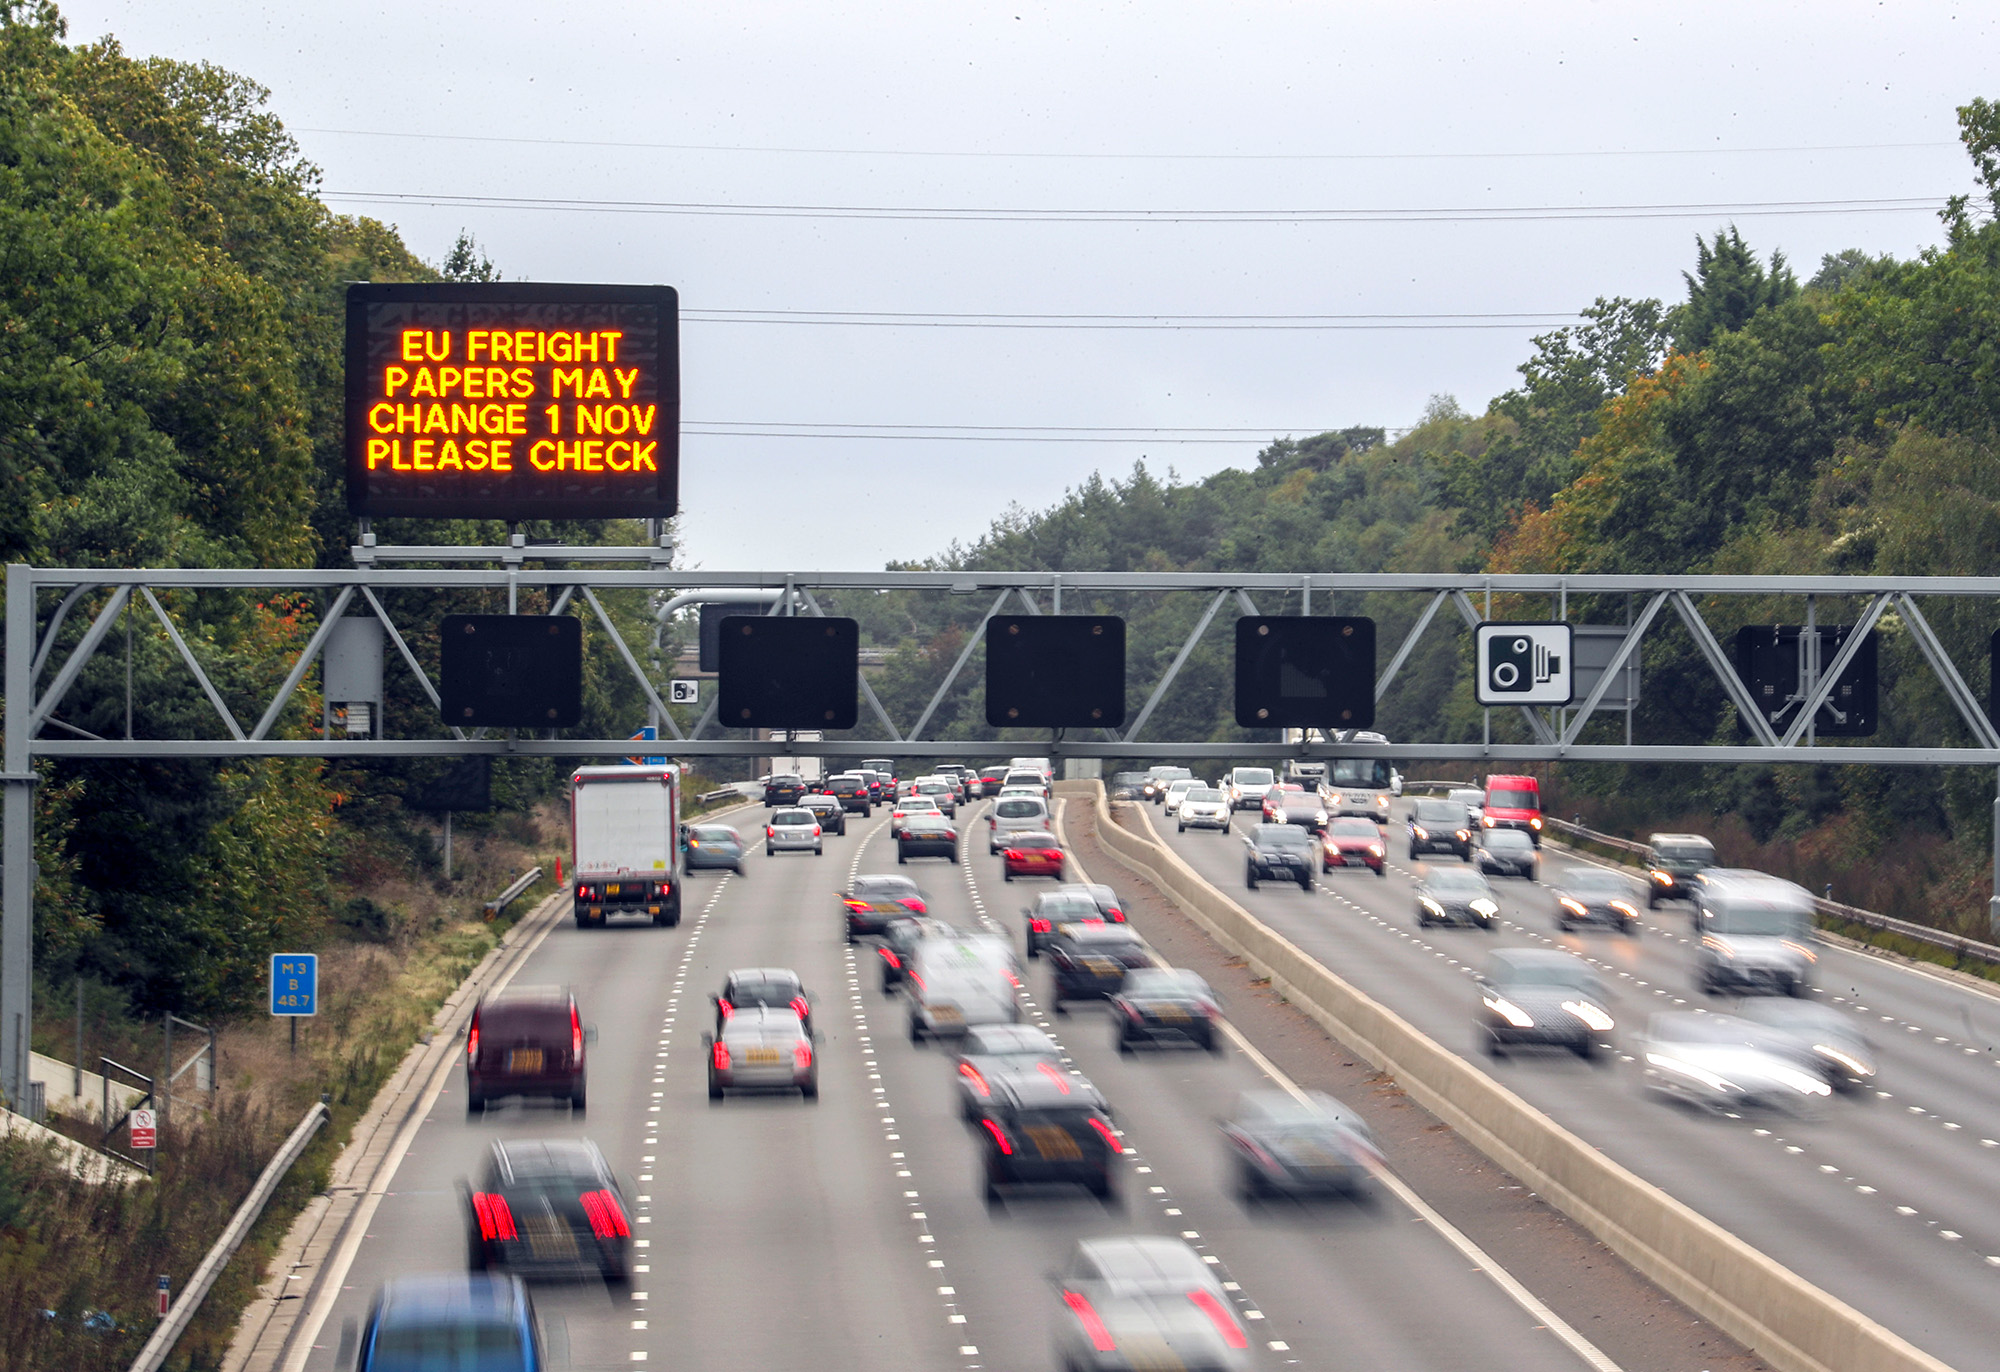 Matrix sign over M3 near Camberley warning about EU freight paper changes ahead of Brexit, via PA, 30 Sep 2019